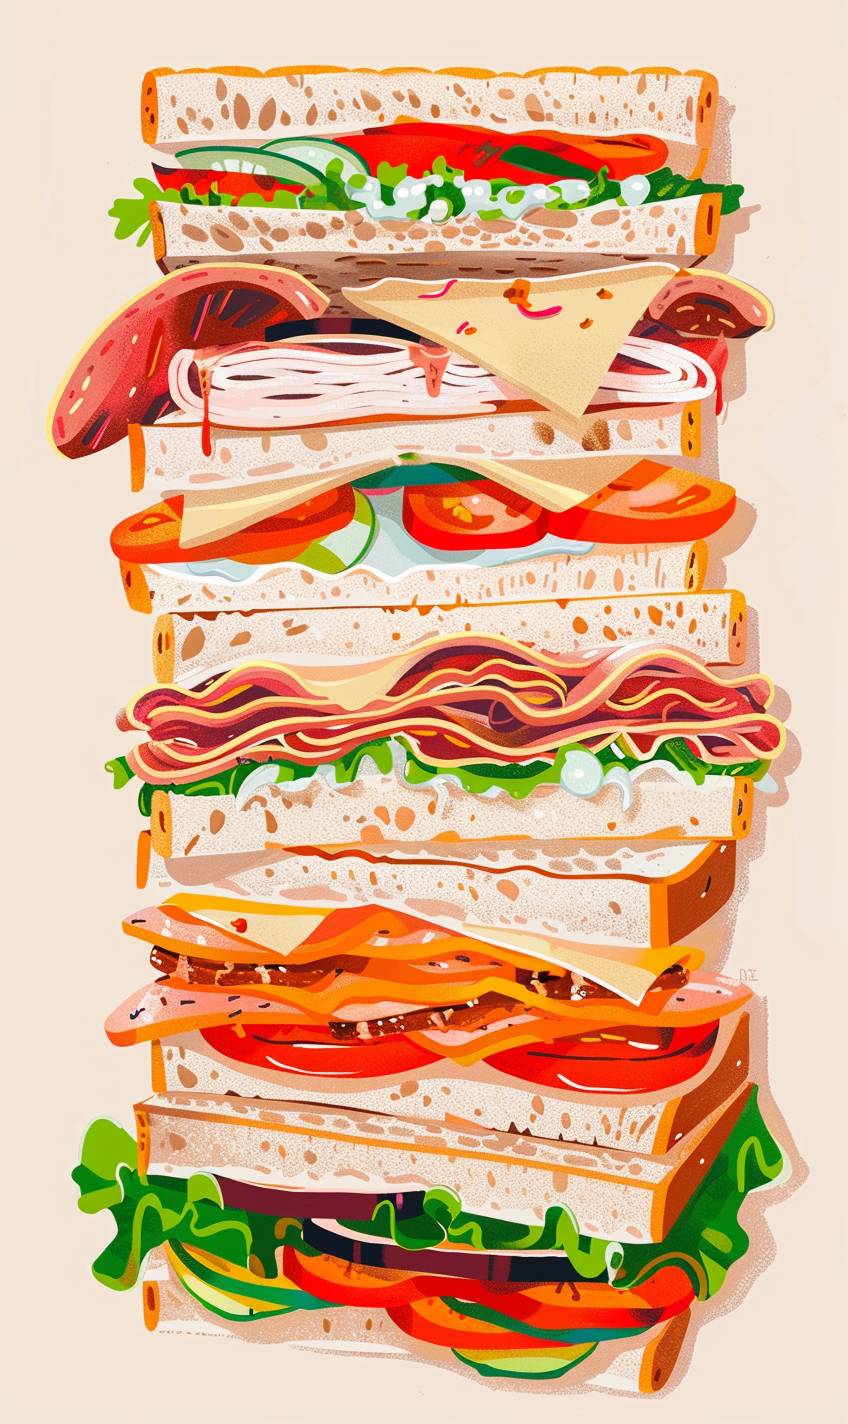 Please create a Milton Glaser style graphic art of meat, chicken, and vegetarian sandwiches all on a light background